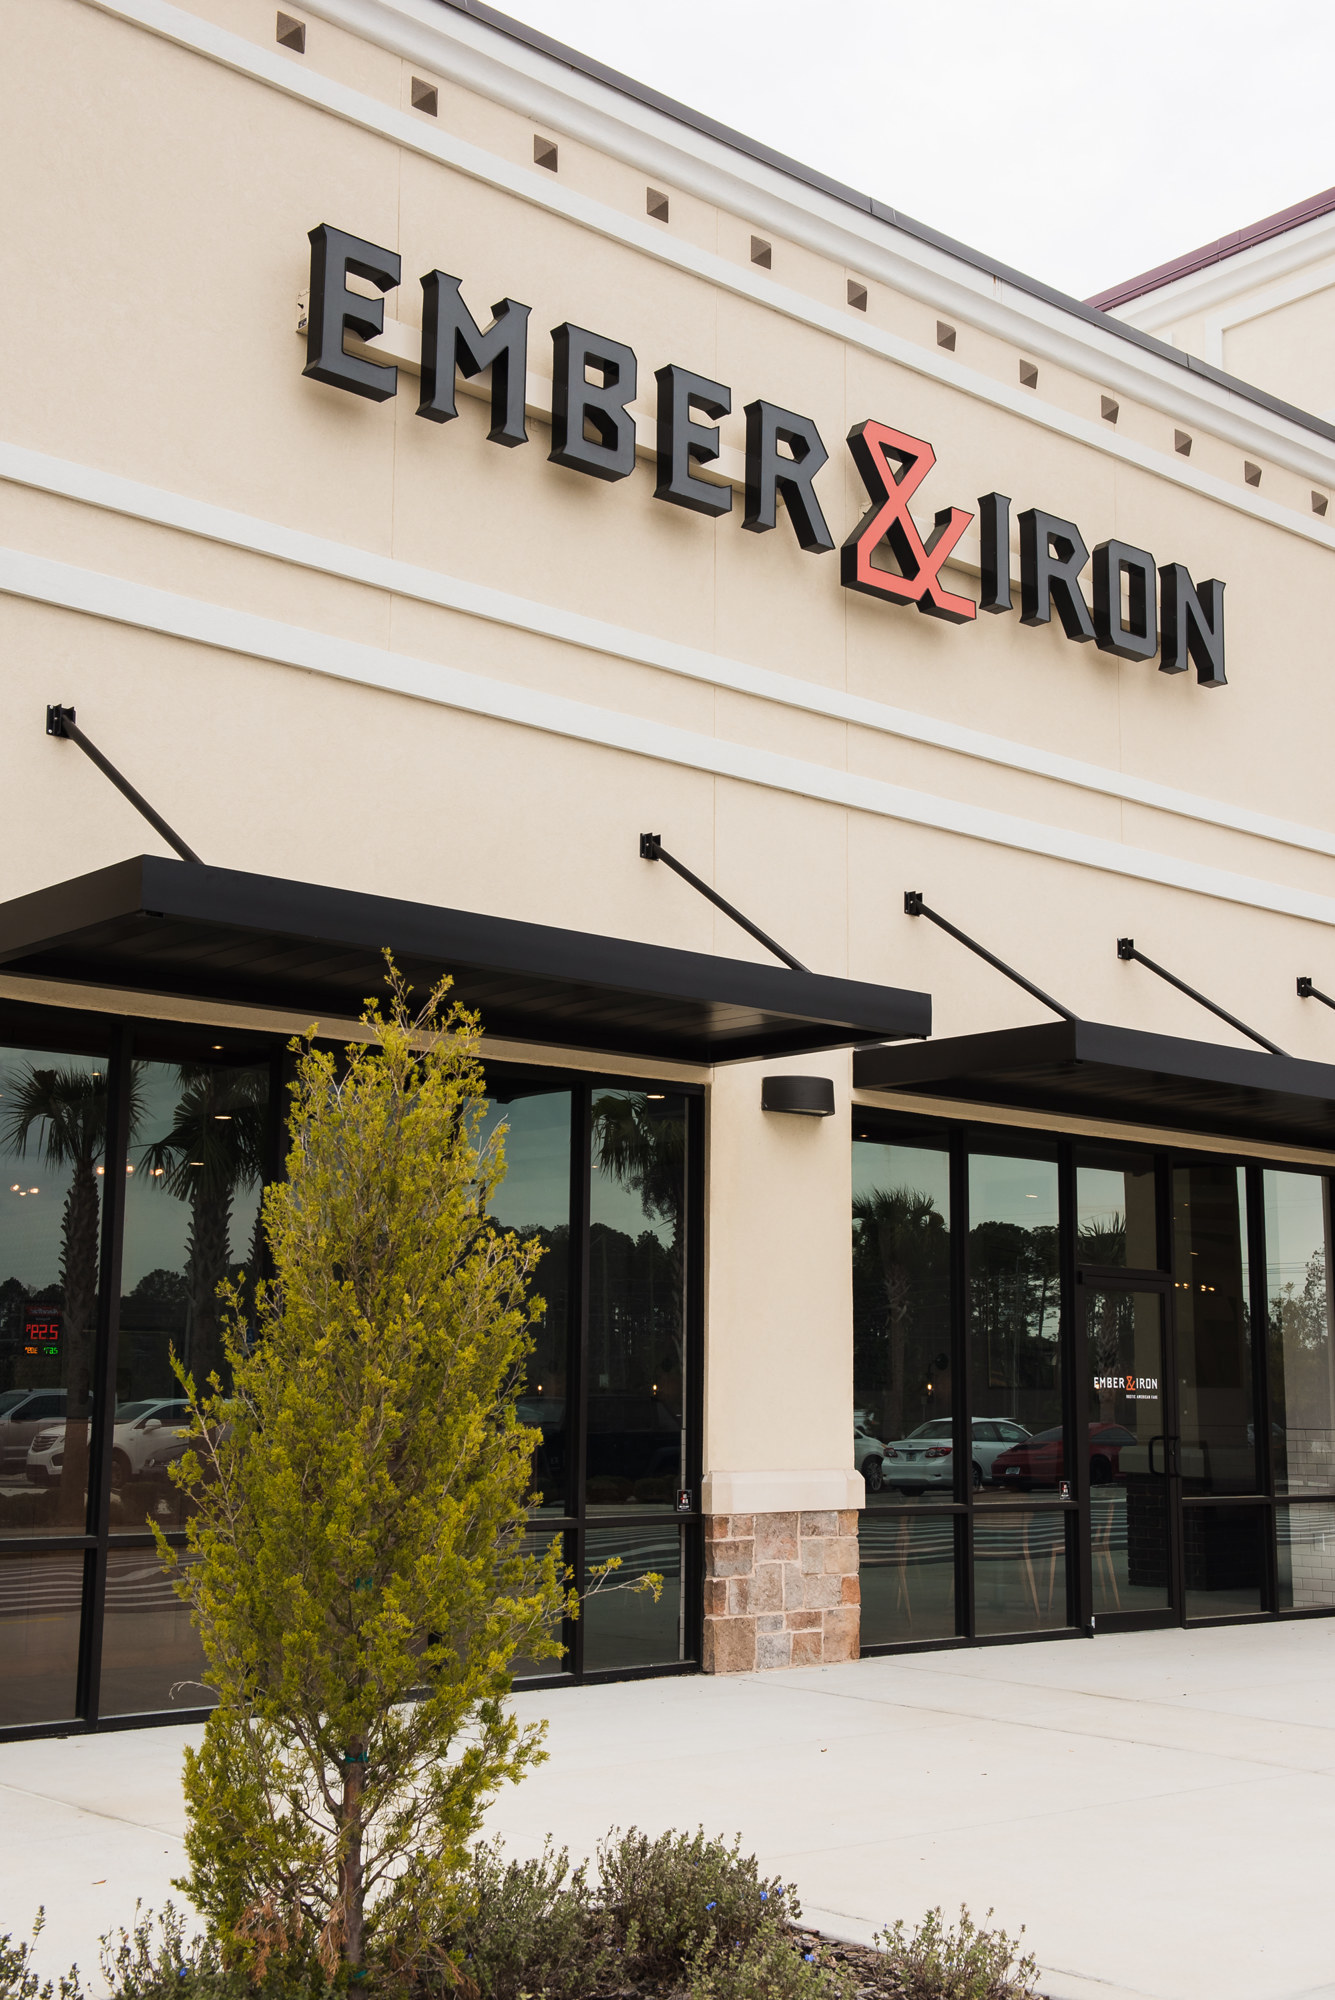 Ember & Iron opened Feb. 22, 2021, at 60 Shops Blvd., Unit 80, in the Shoppes of St. Johns Parkway.